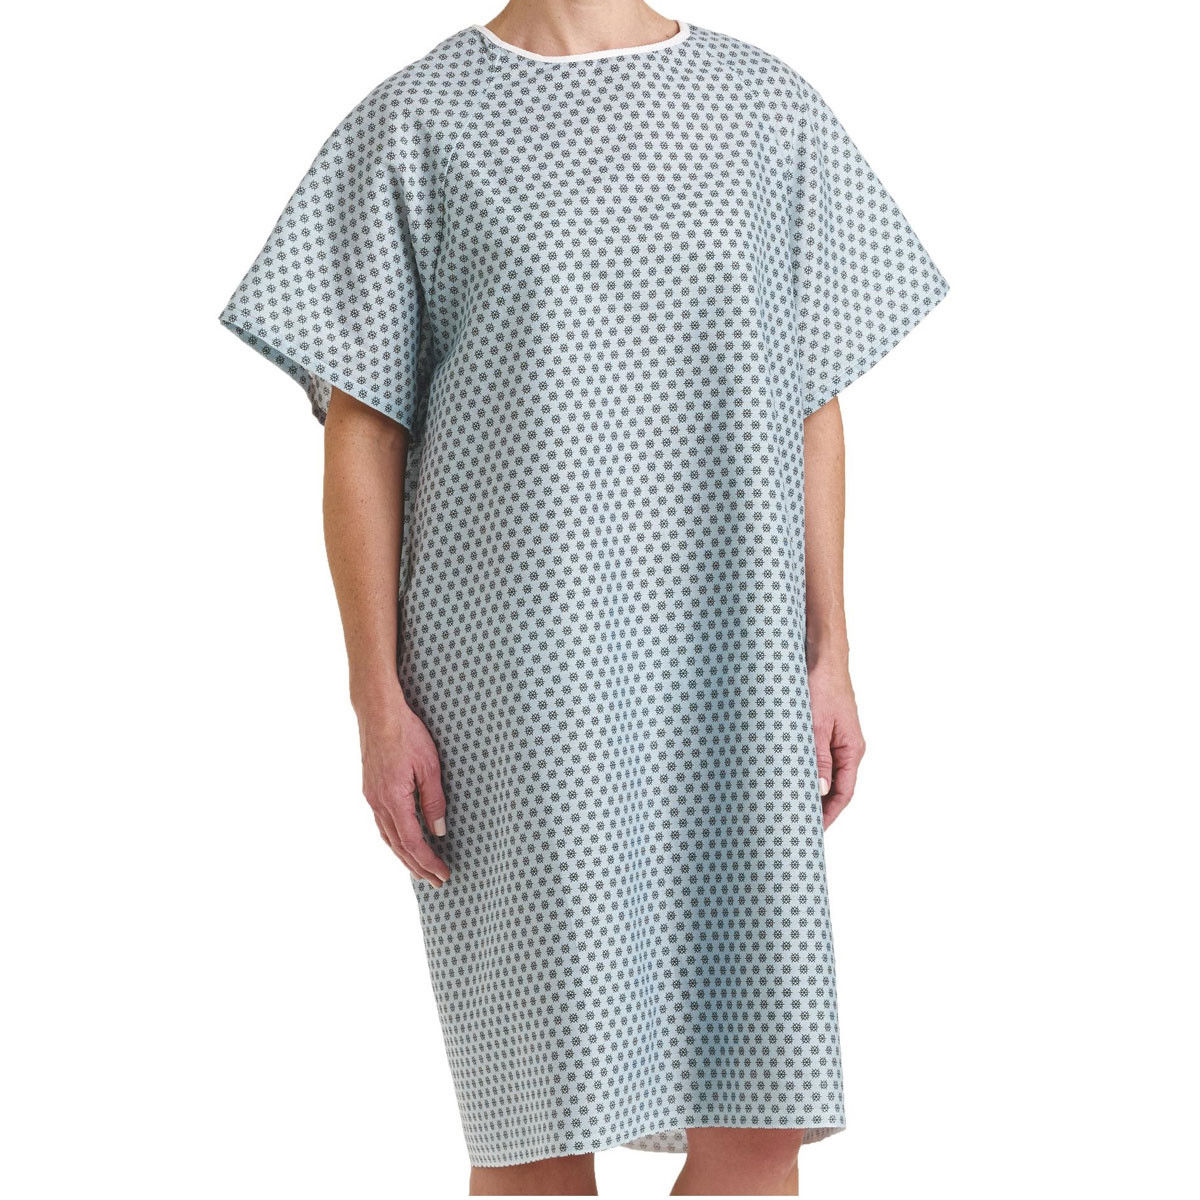 Where can I find the closures on this Traditional Patient Gown hospital gown?